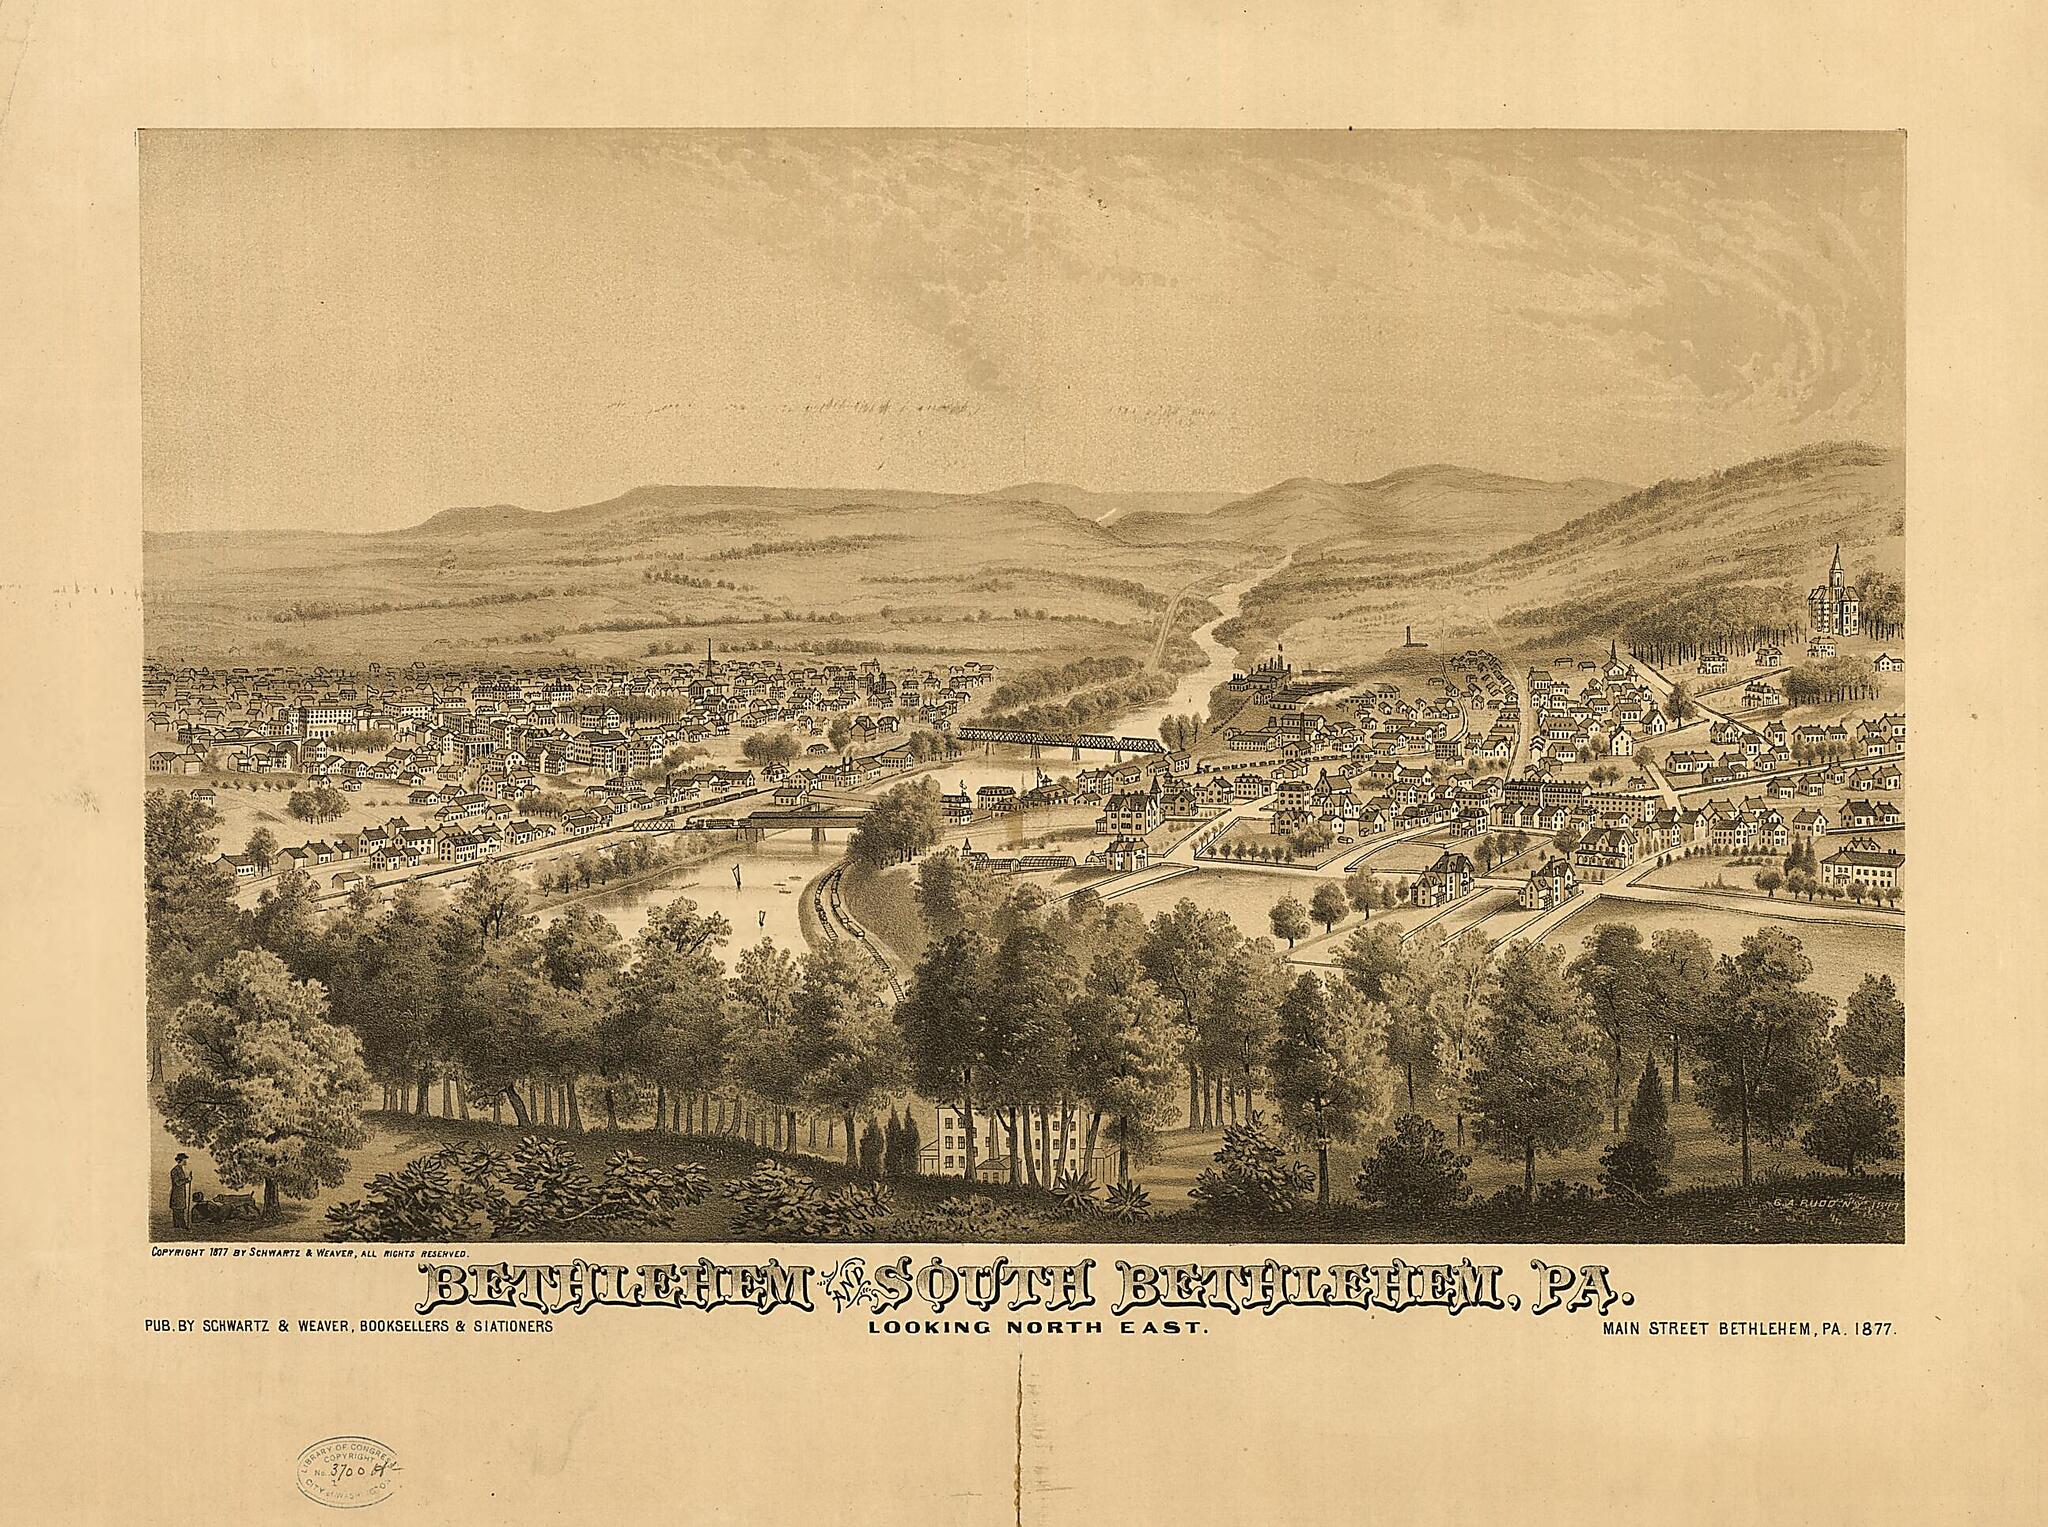 This old map of Bethlehem and South Bethlehem, Pennsylvania Looking North East / G.A. Rudd, New York from 1877 was created by G. A. Rudd in 1877